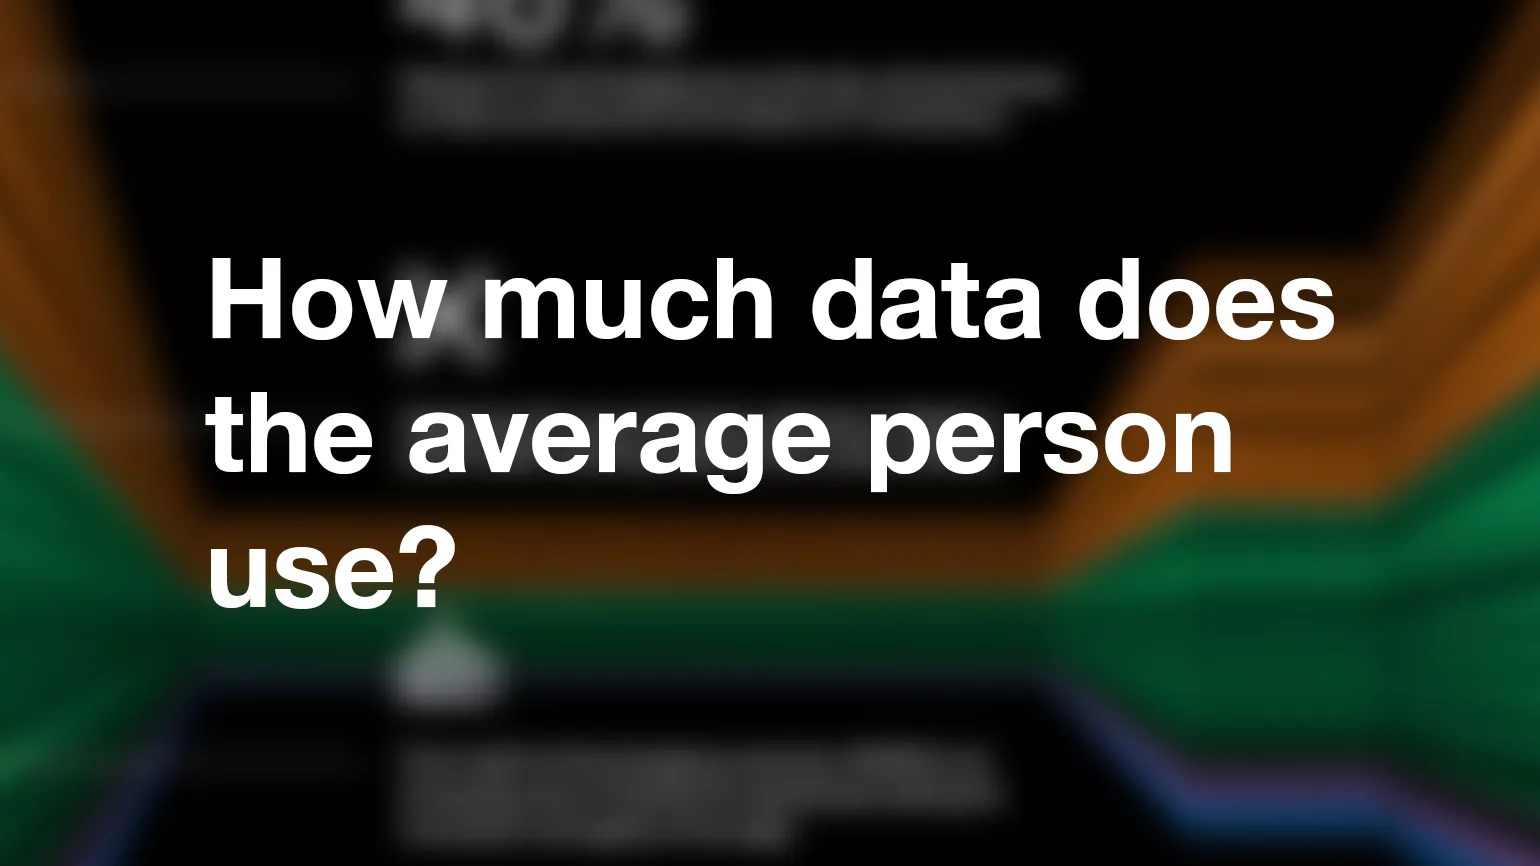 How much data does the average person use?